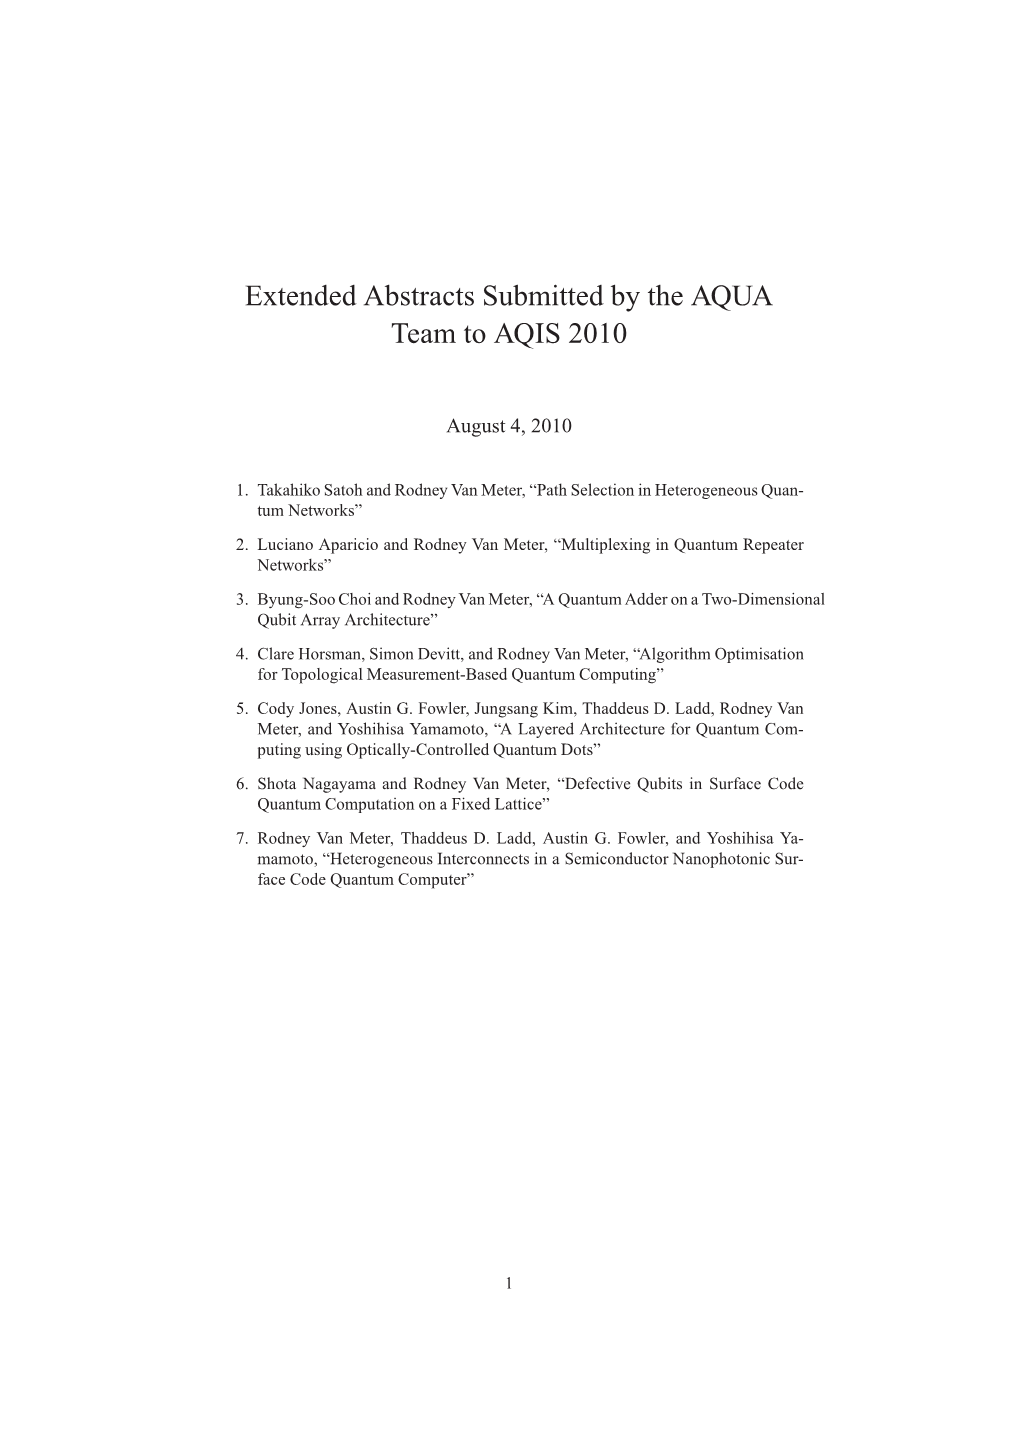 Extended Abstracts Submitted by the AQUA Team to AQIS 2010